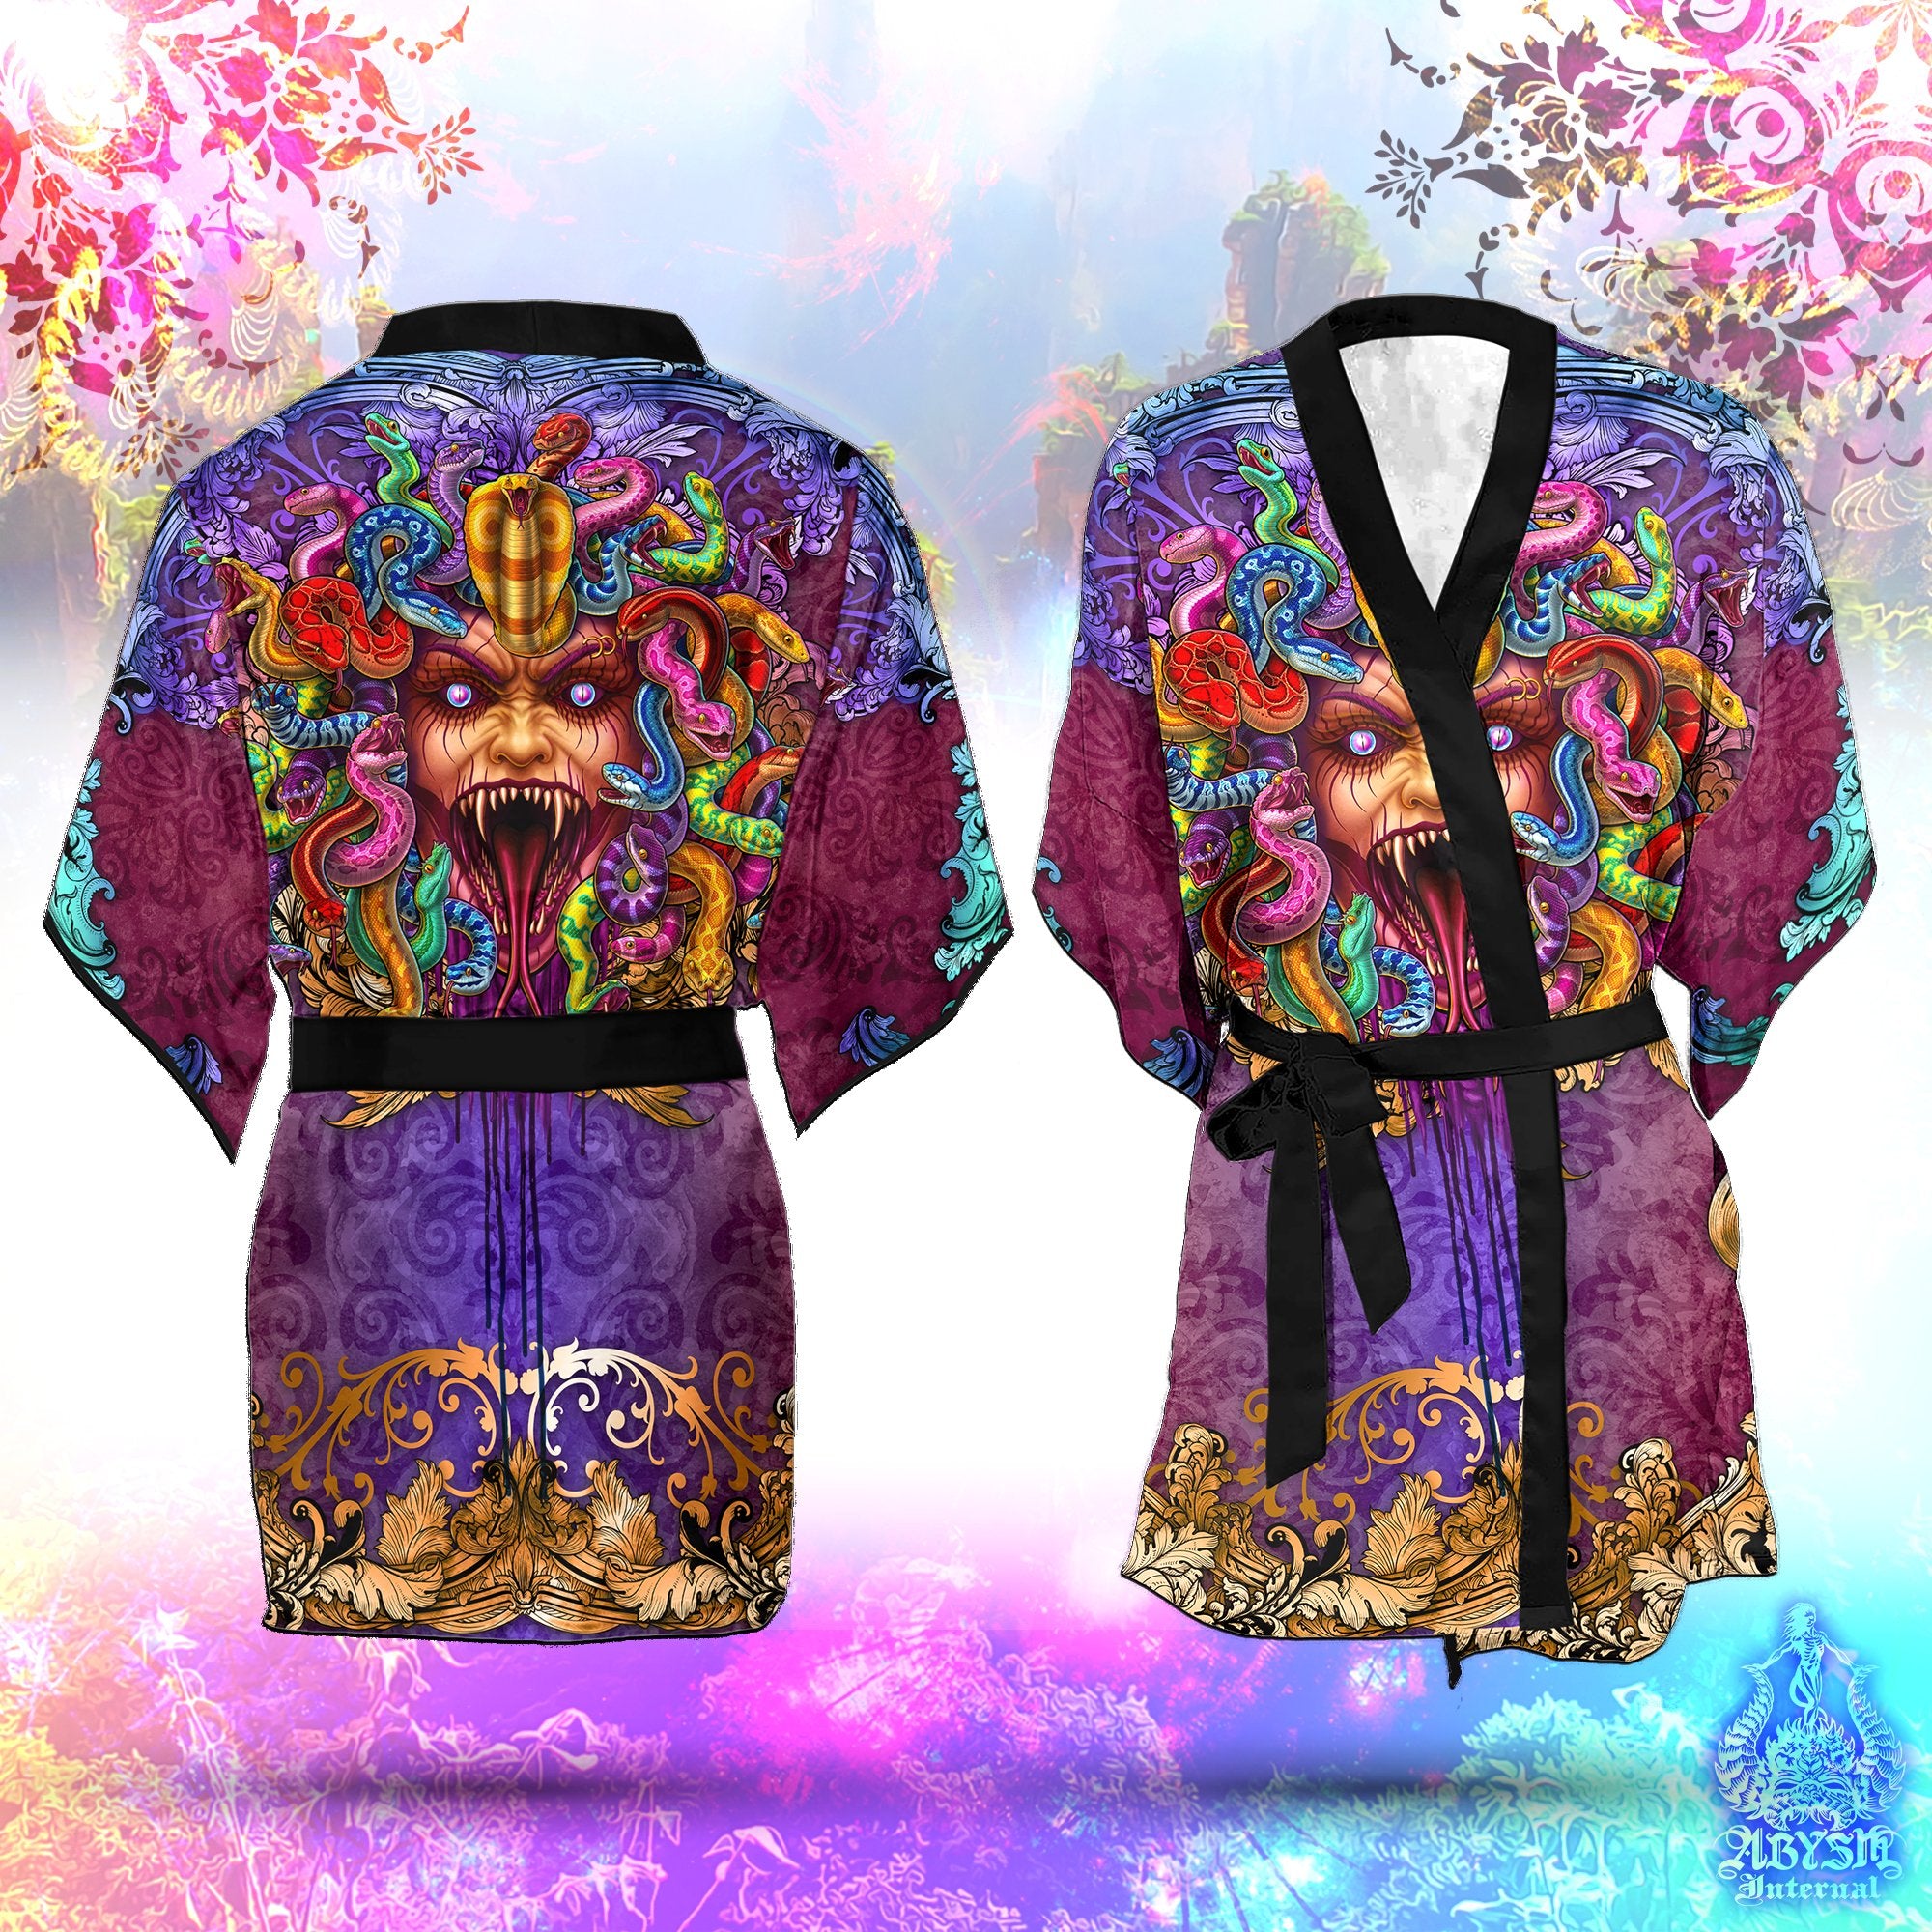 Rave Short Kimono Robe, Beach Party Outfit, Psychedelic Medusa Coverup, Summer Festival, Indie and Alternative Clothing, Unisex - Psy, 2 Faces - Abysm Internal